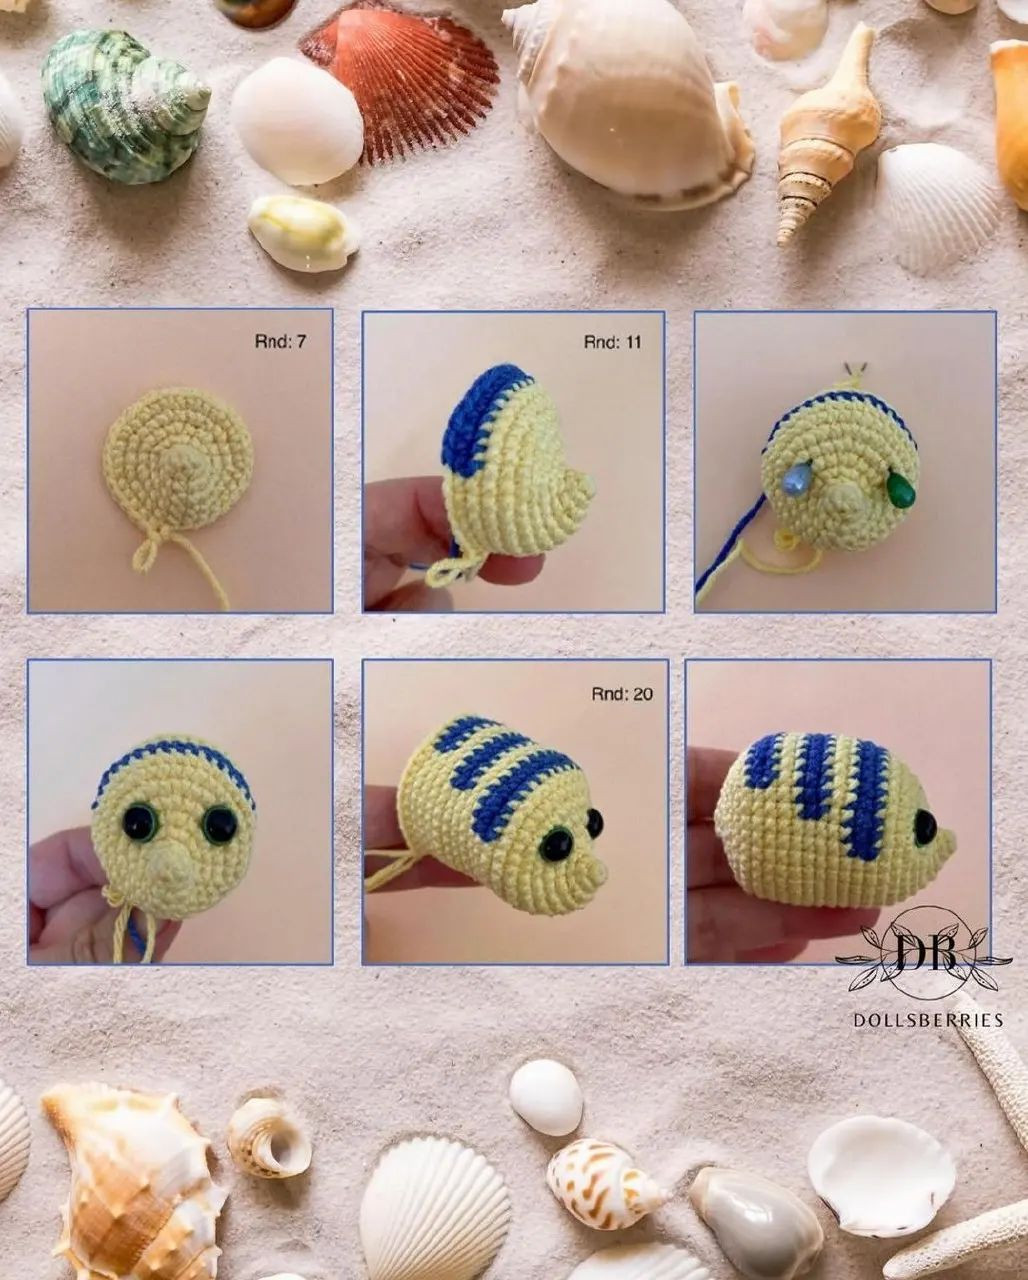 Yellow fish crochet pattern with blue fin